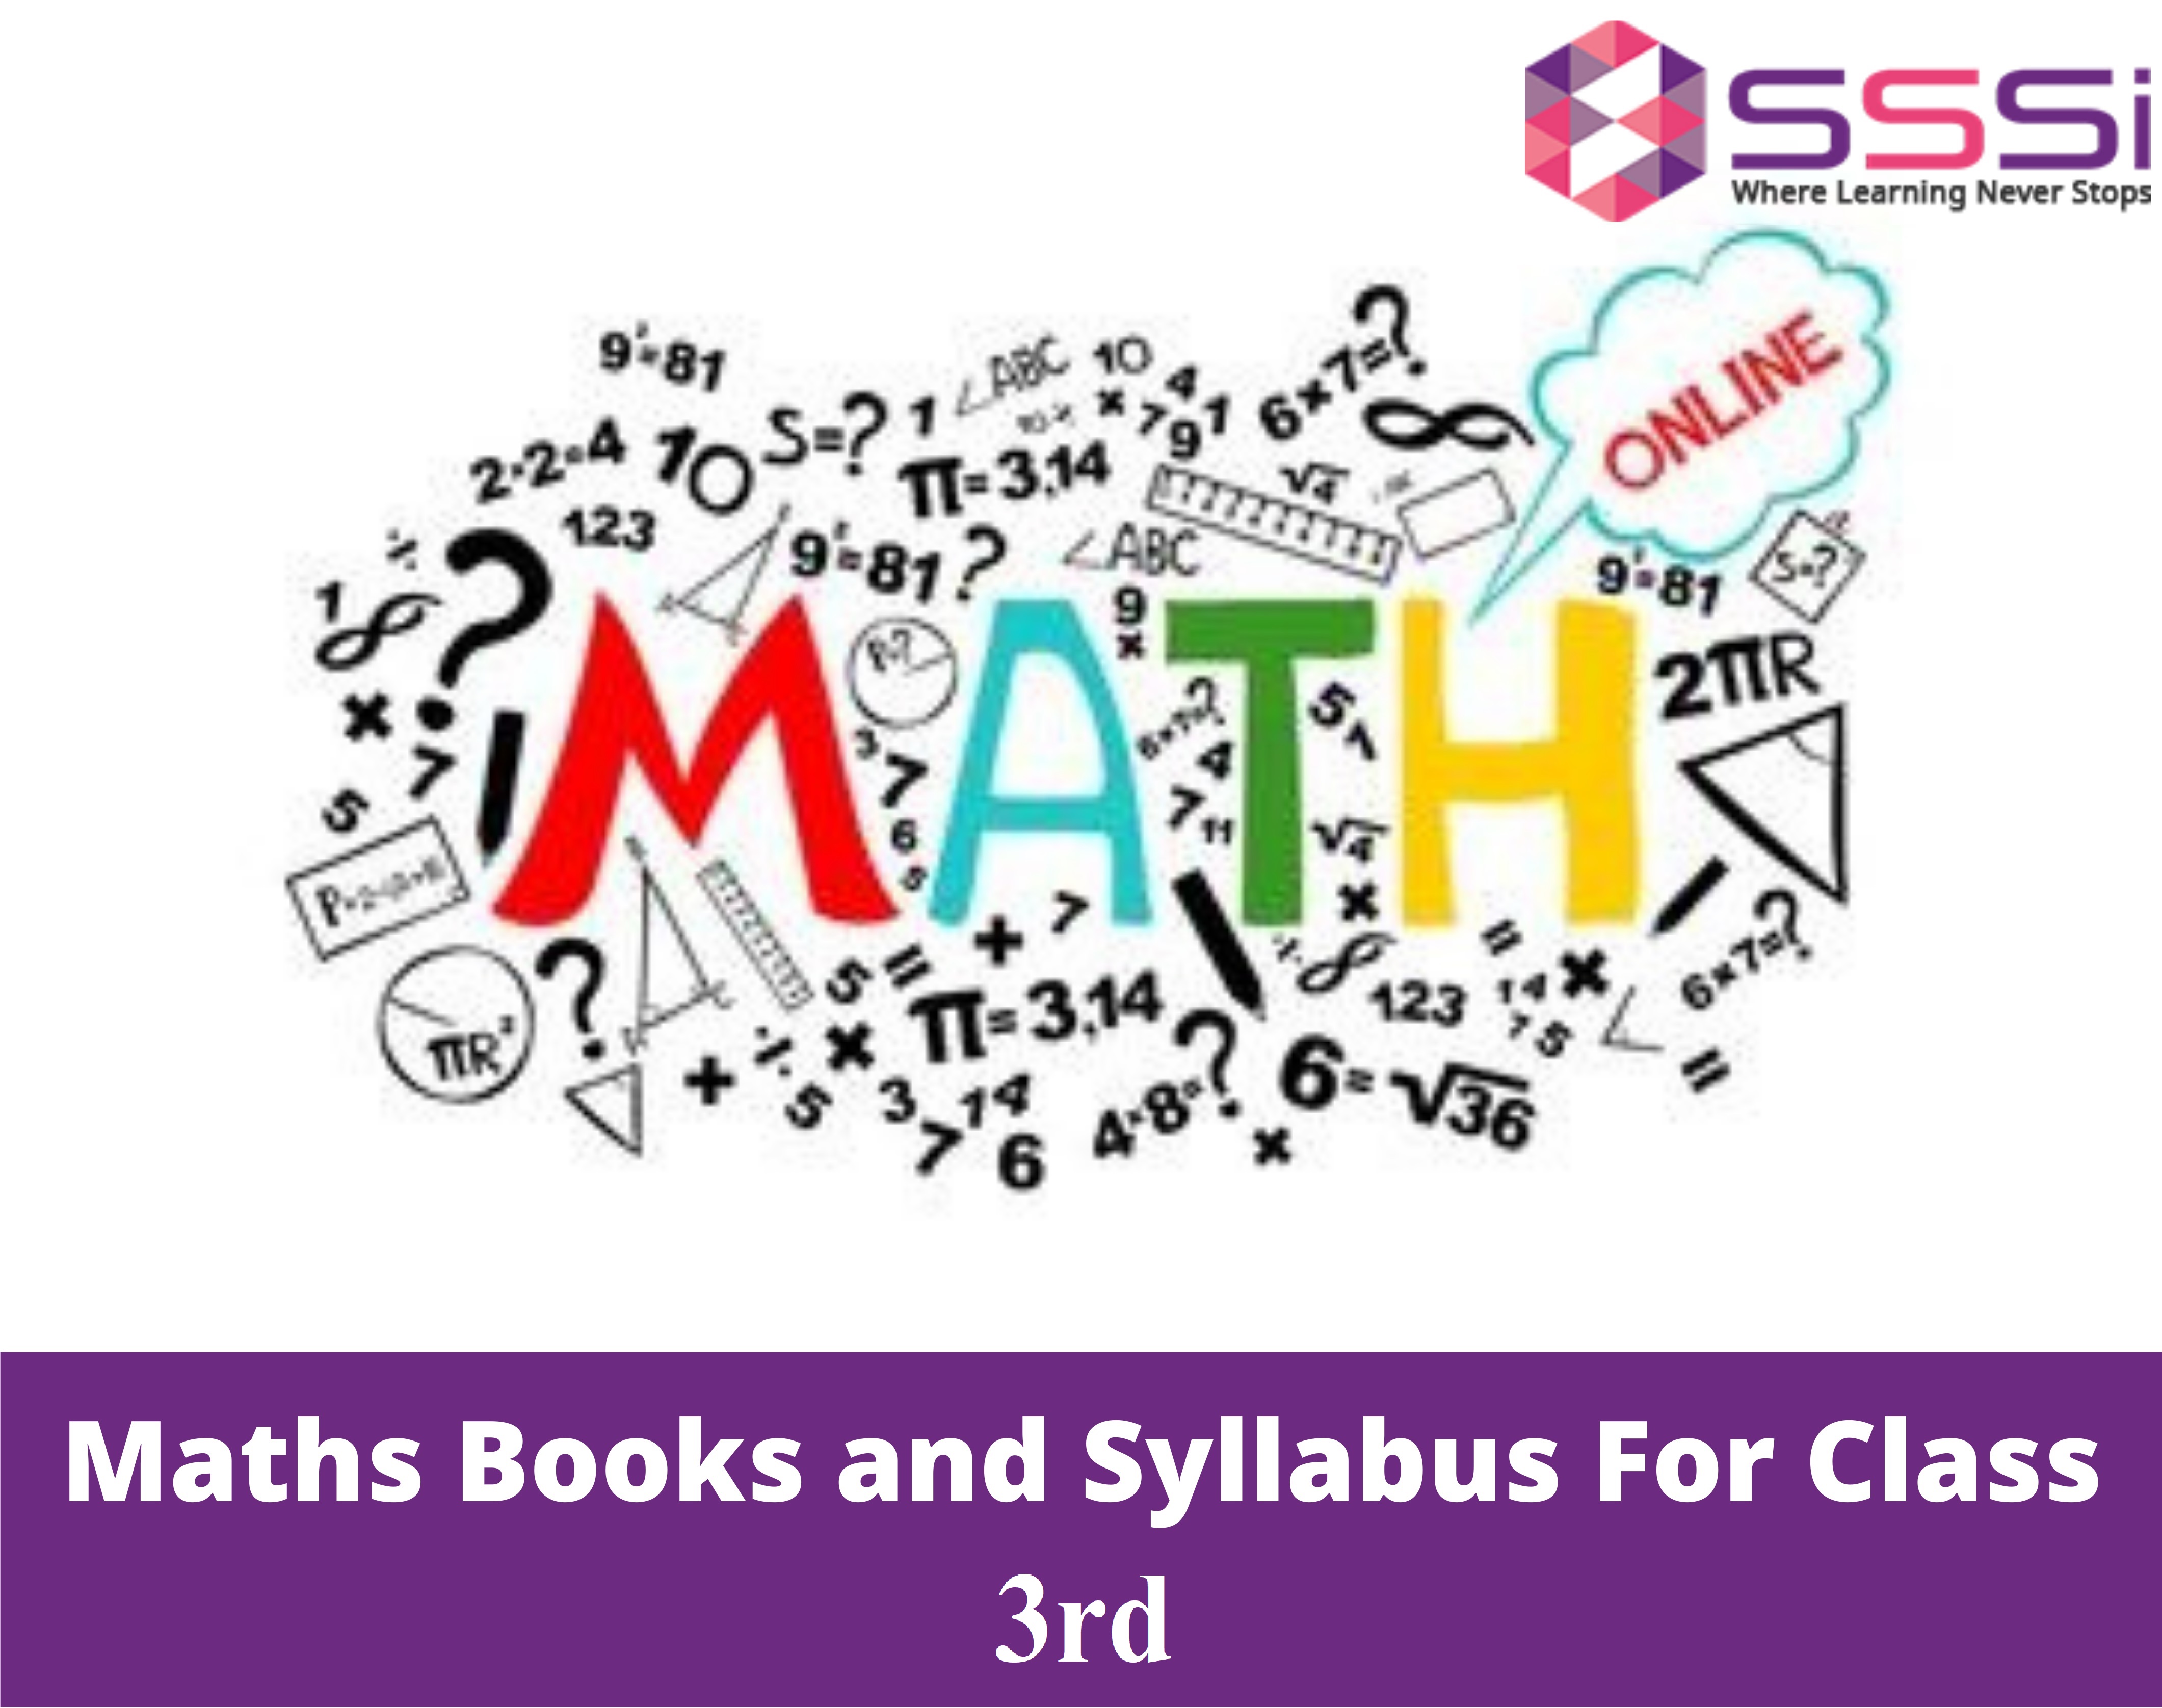 Maths Books and Syllabus For Class 3